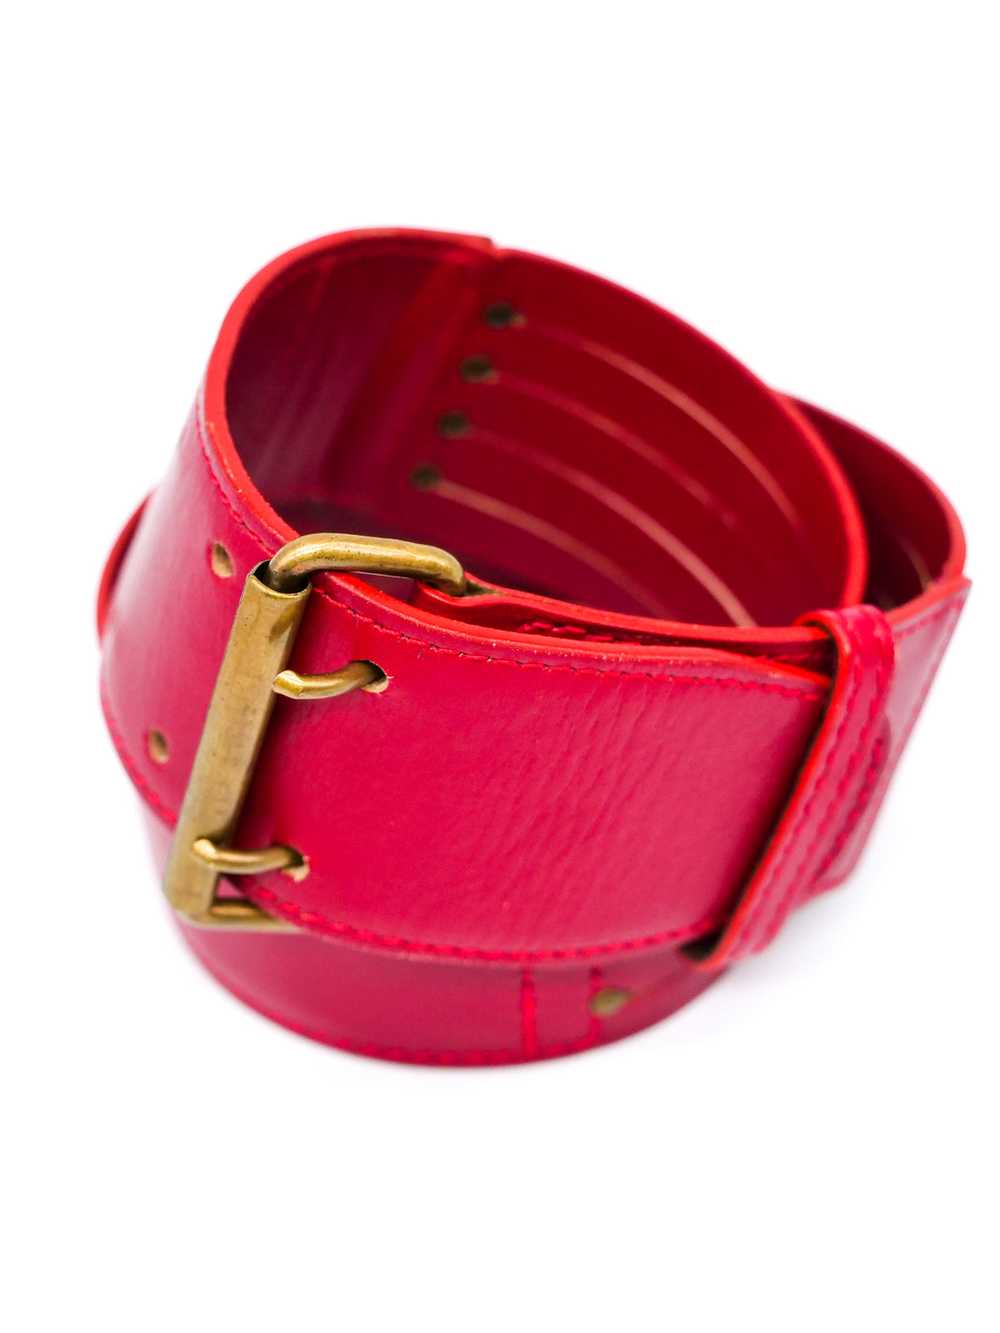 Alaia Perforated Red Leather Belt - image 4